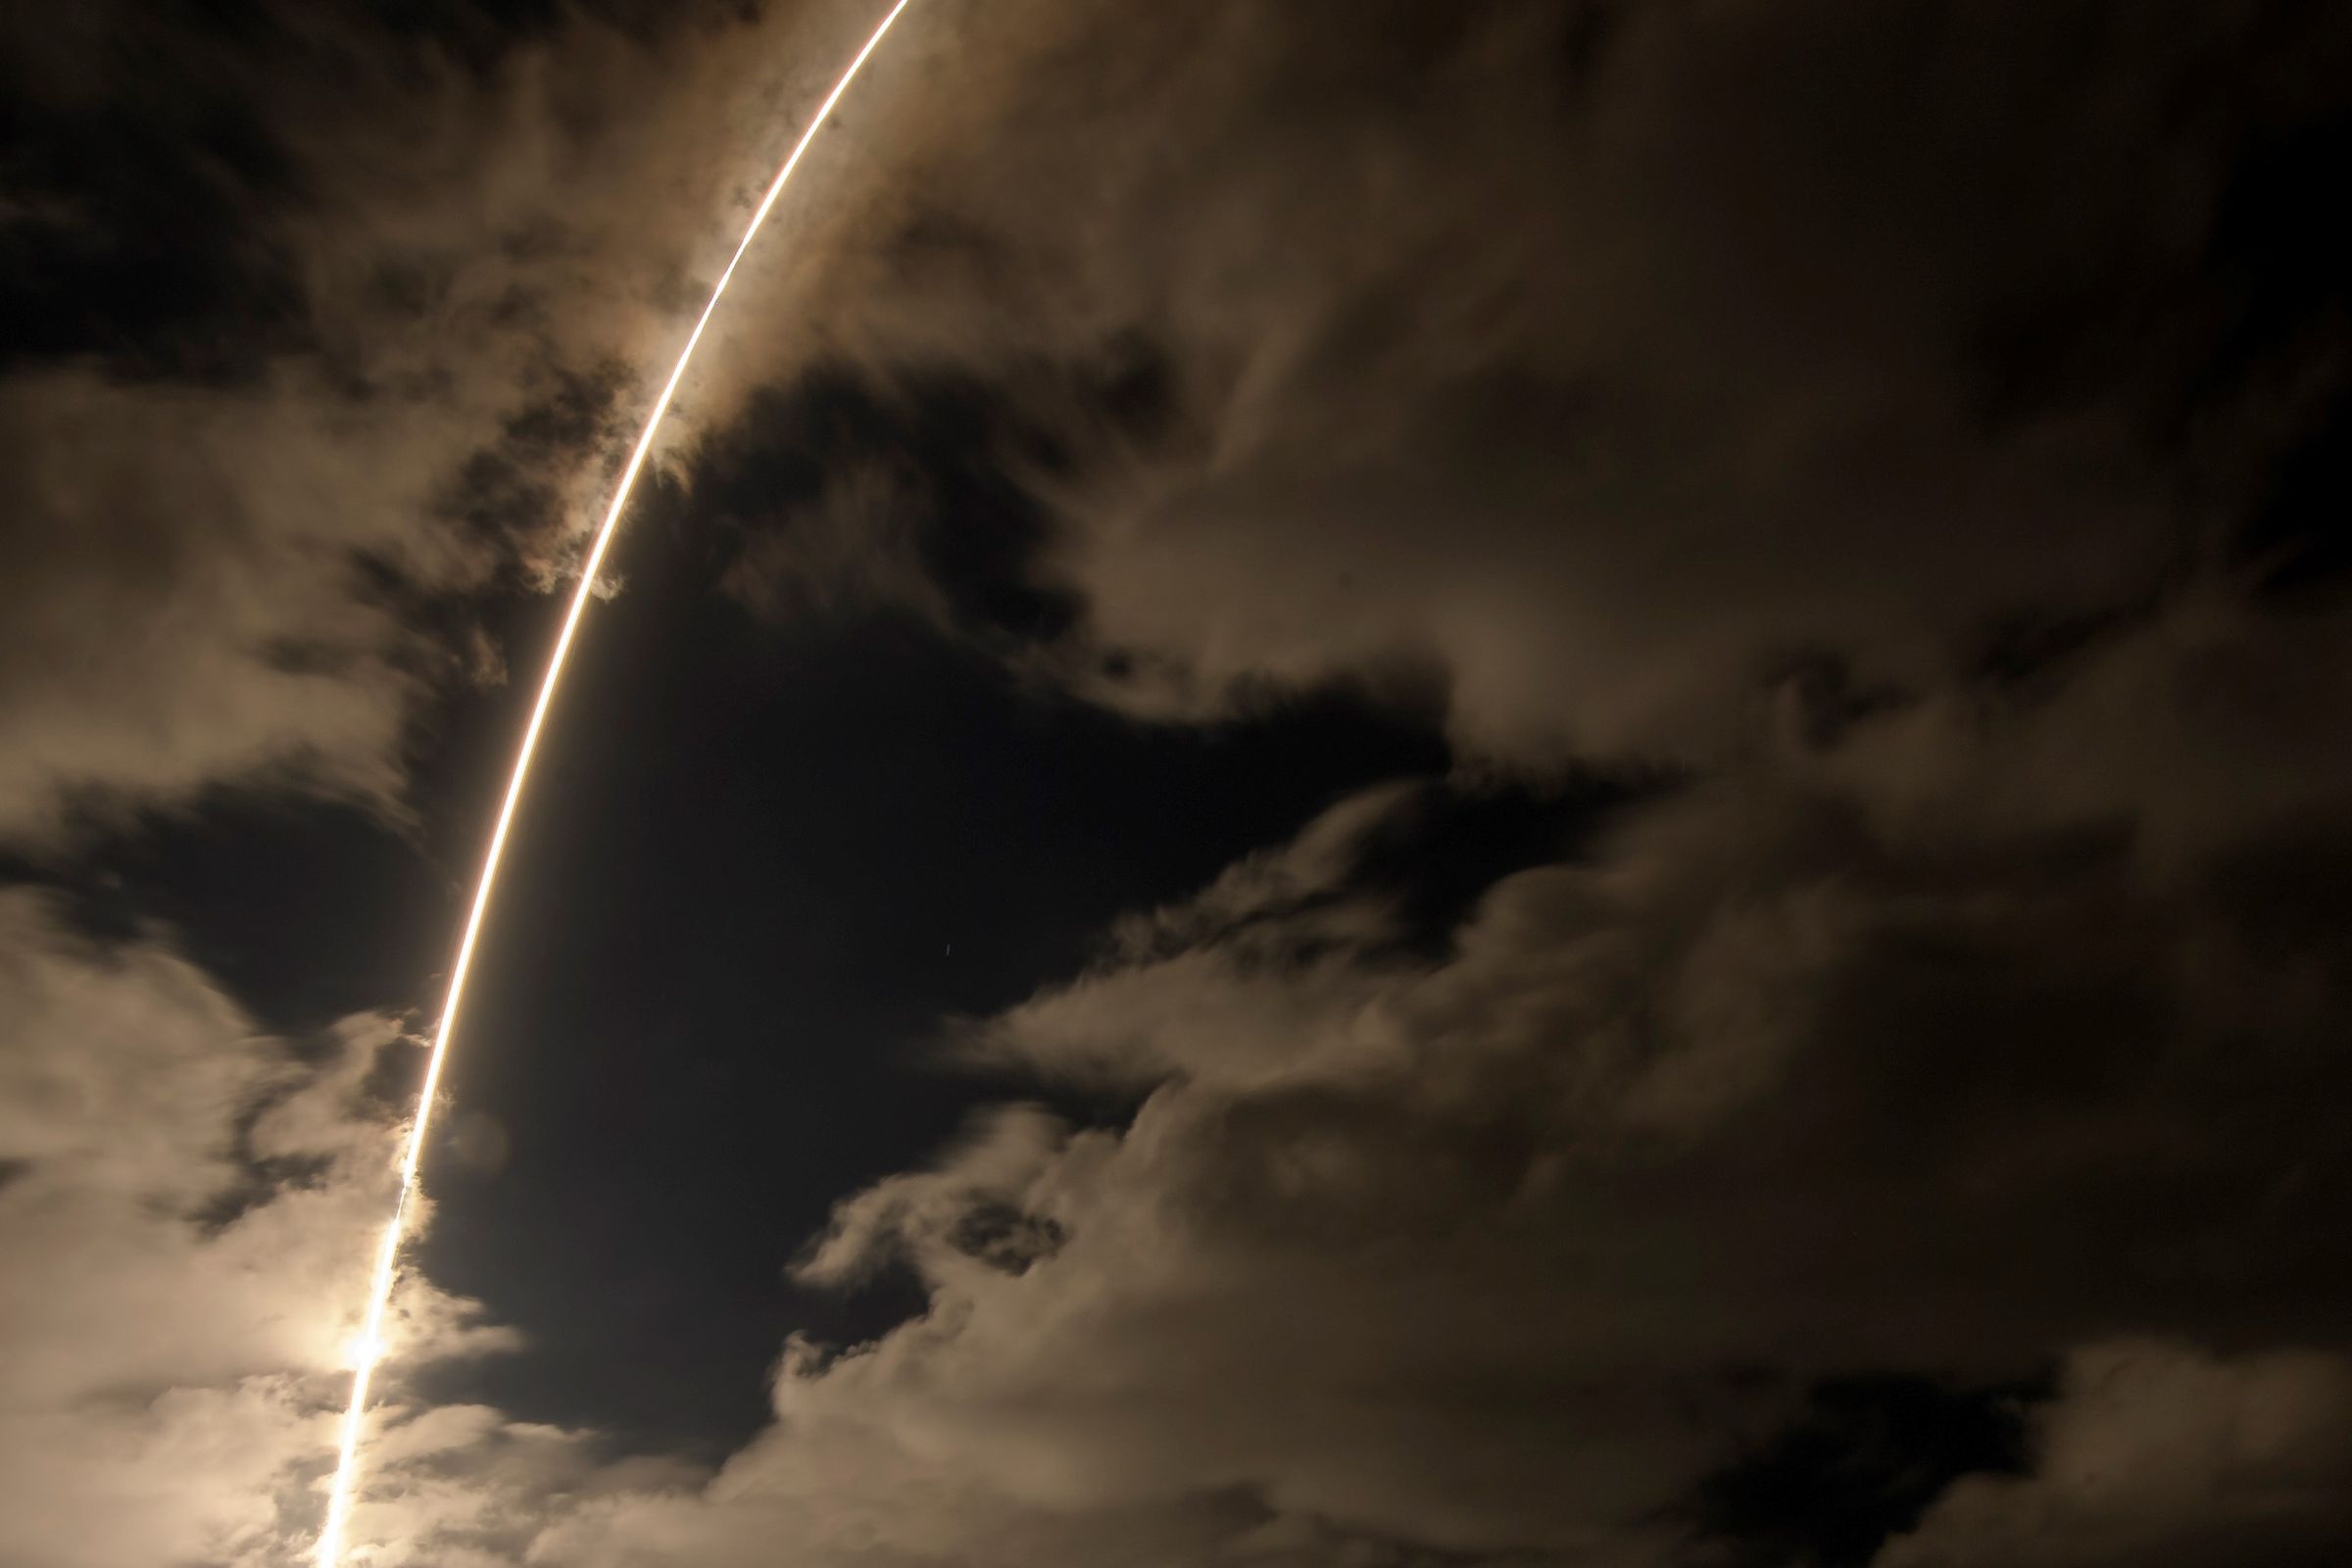 A United Launch Alliance Atlas V rocket with the Lucy spacecraft aboard is seen in this 2 minute and 30 second exposure photograph as it launches from Space Launch Complex 41, Saturday, Oct. 16, 2021, at Cape Canaveral Space Force Station in Florida.